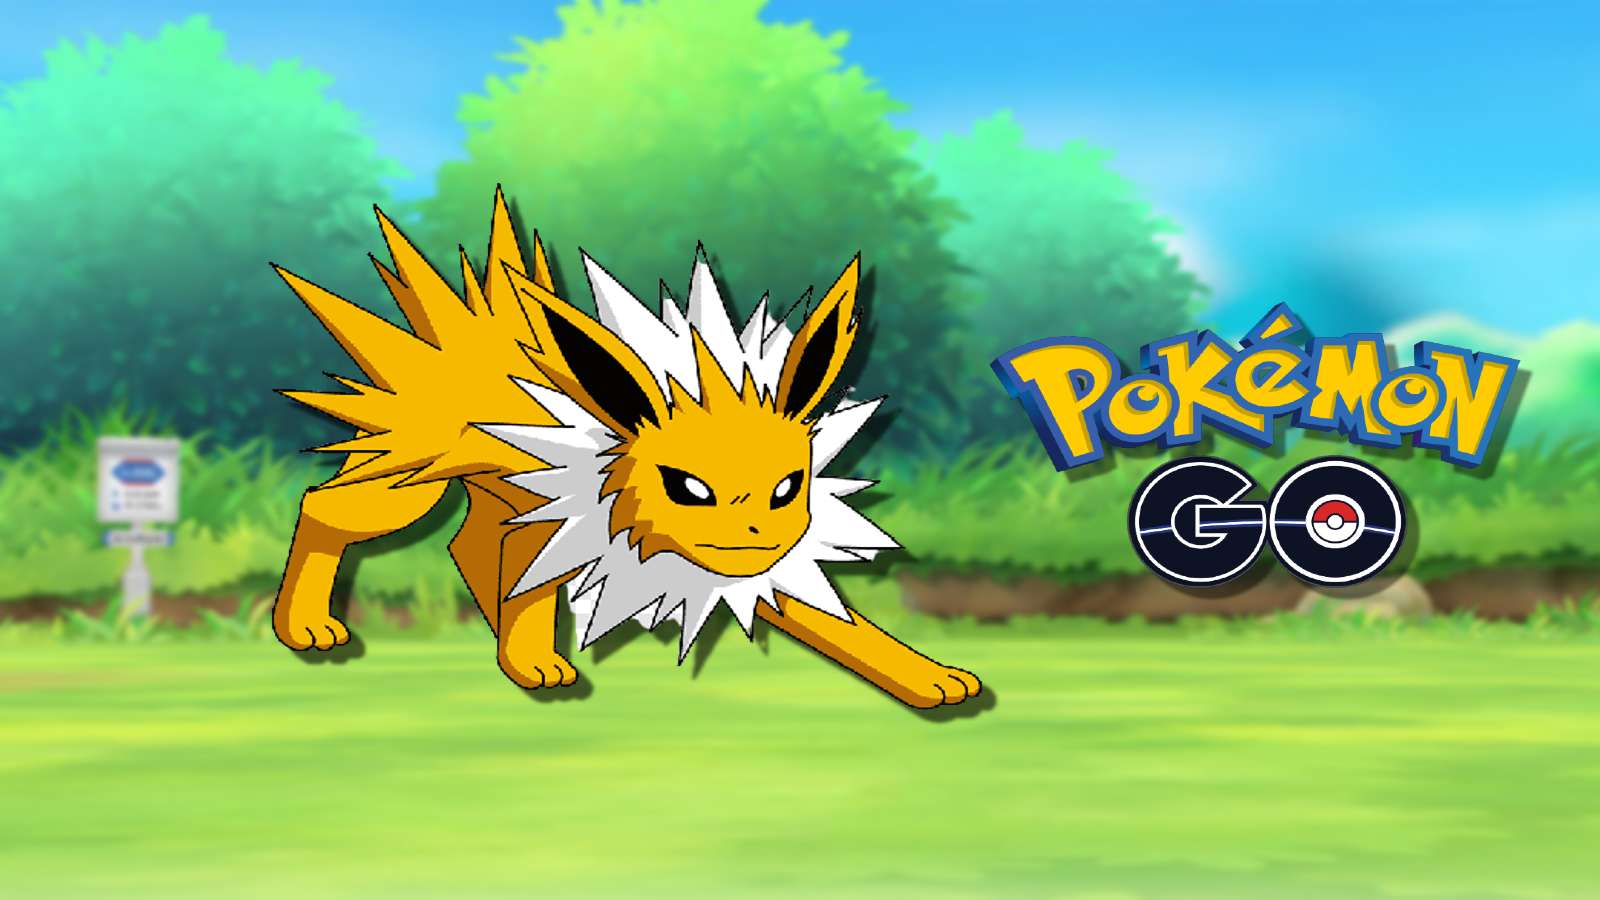 Jolteon fin front of a Pokemon-themed backdrop.